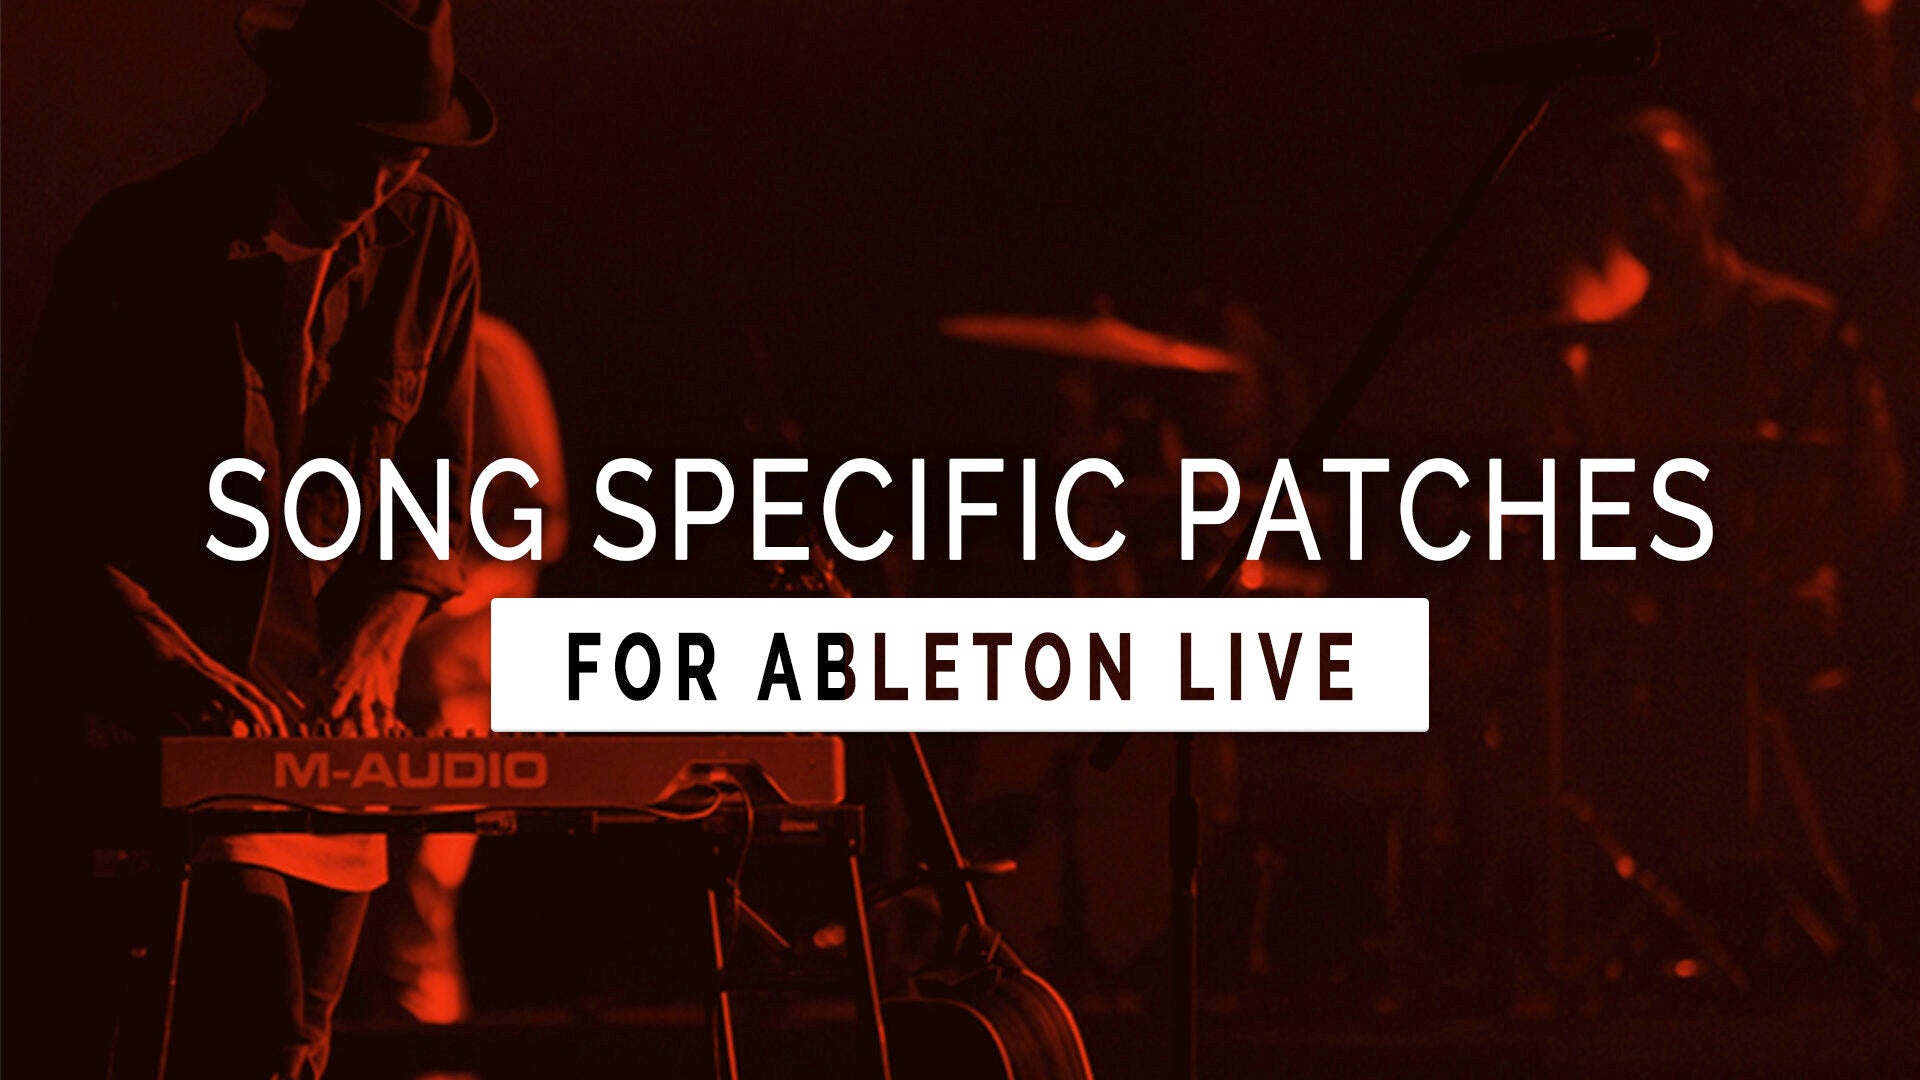 Ableton Live Song Specific Patches are Now Available!